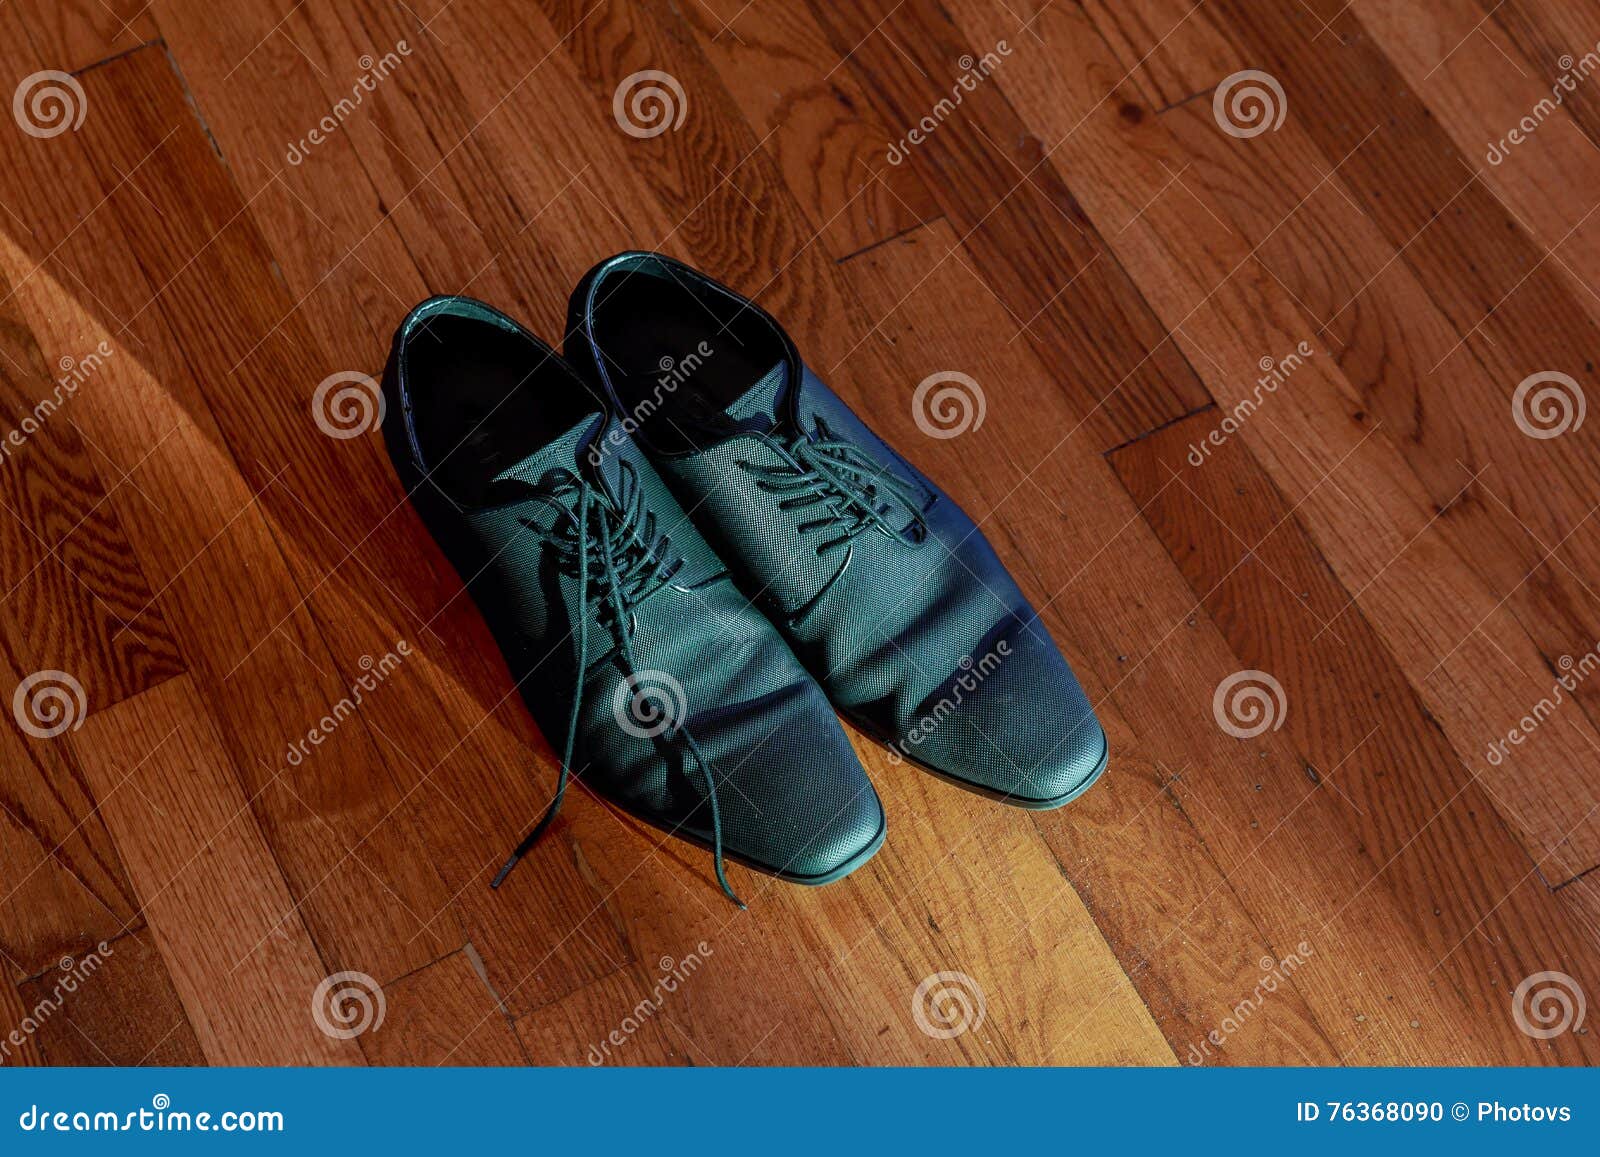 Shiny Black Men S Shoes for the Bride, Lying on the Floor Stock Photo ...